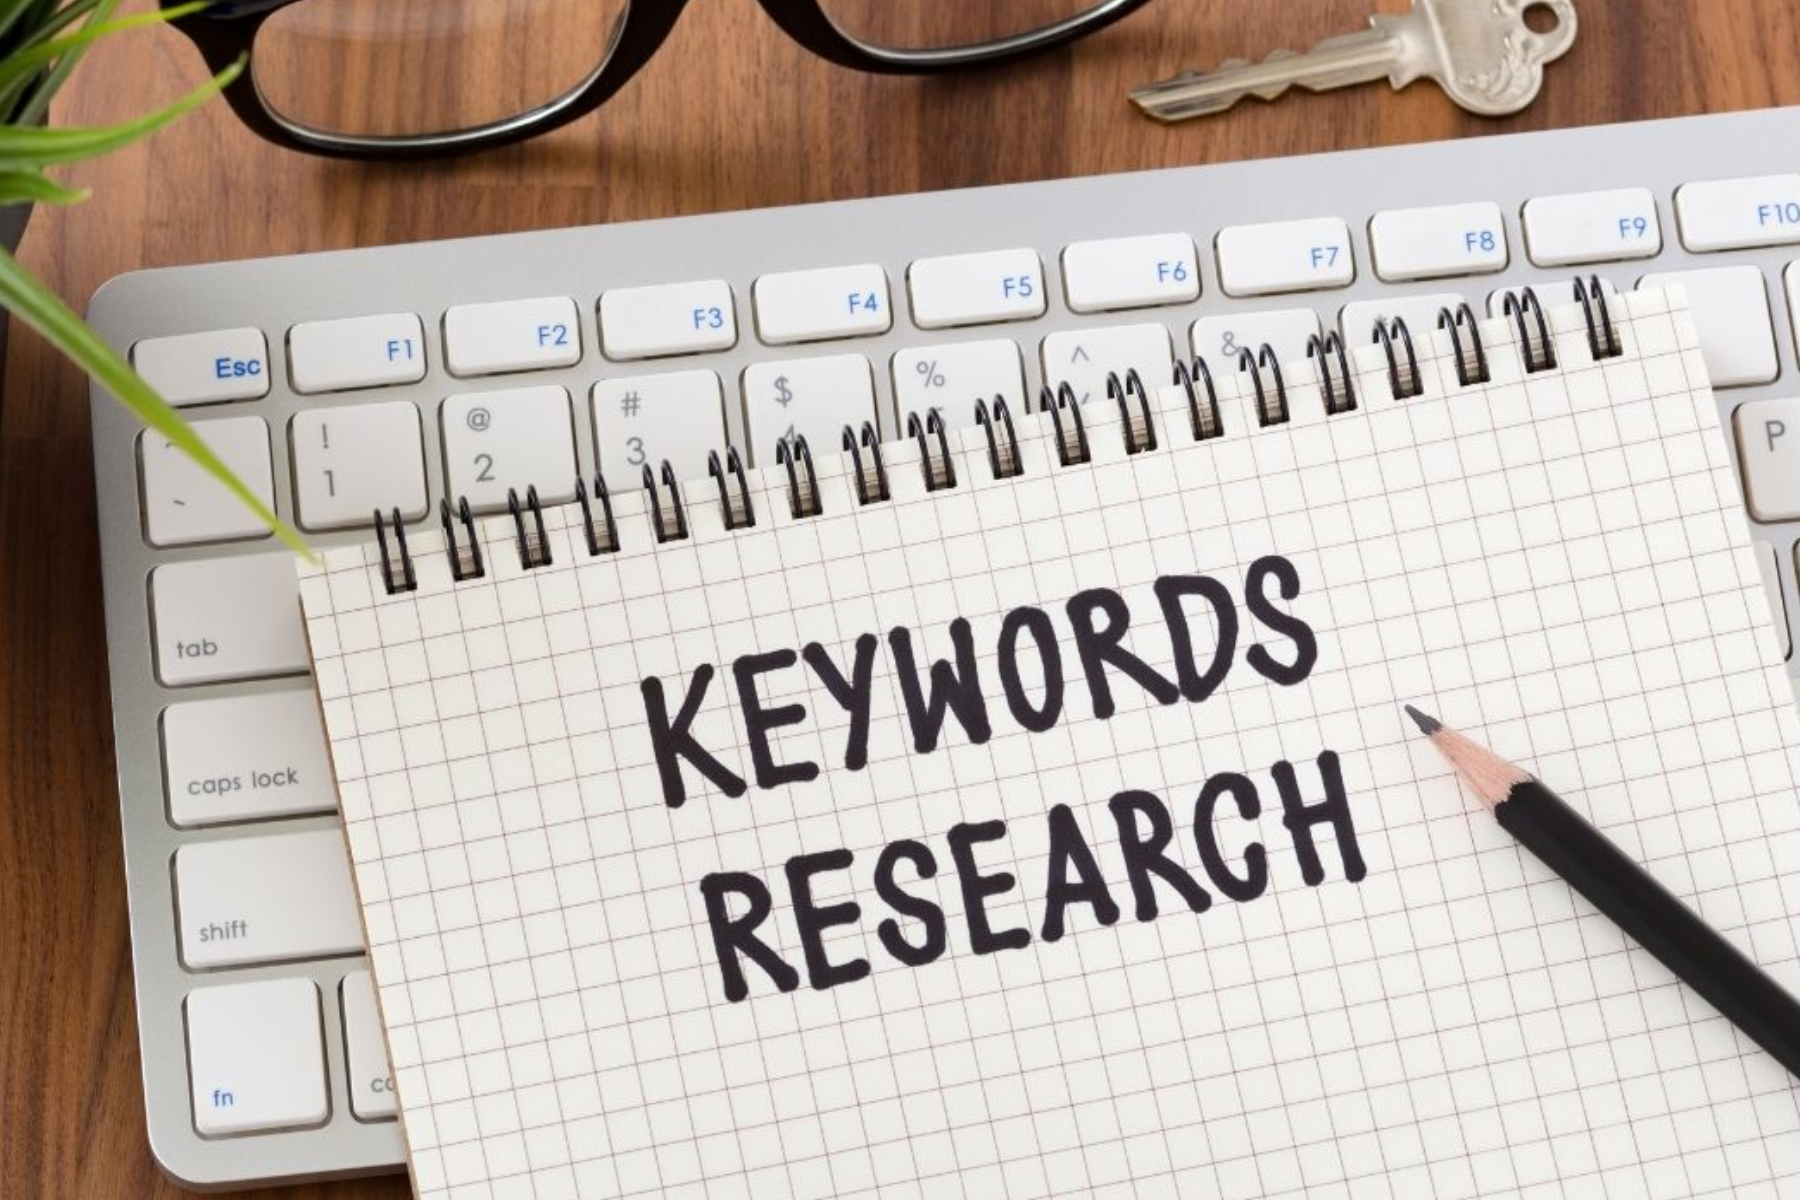 A notebook with the words "Keywords Research" written on it sits on top of the keyboard